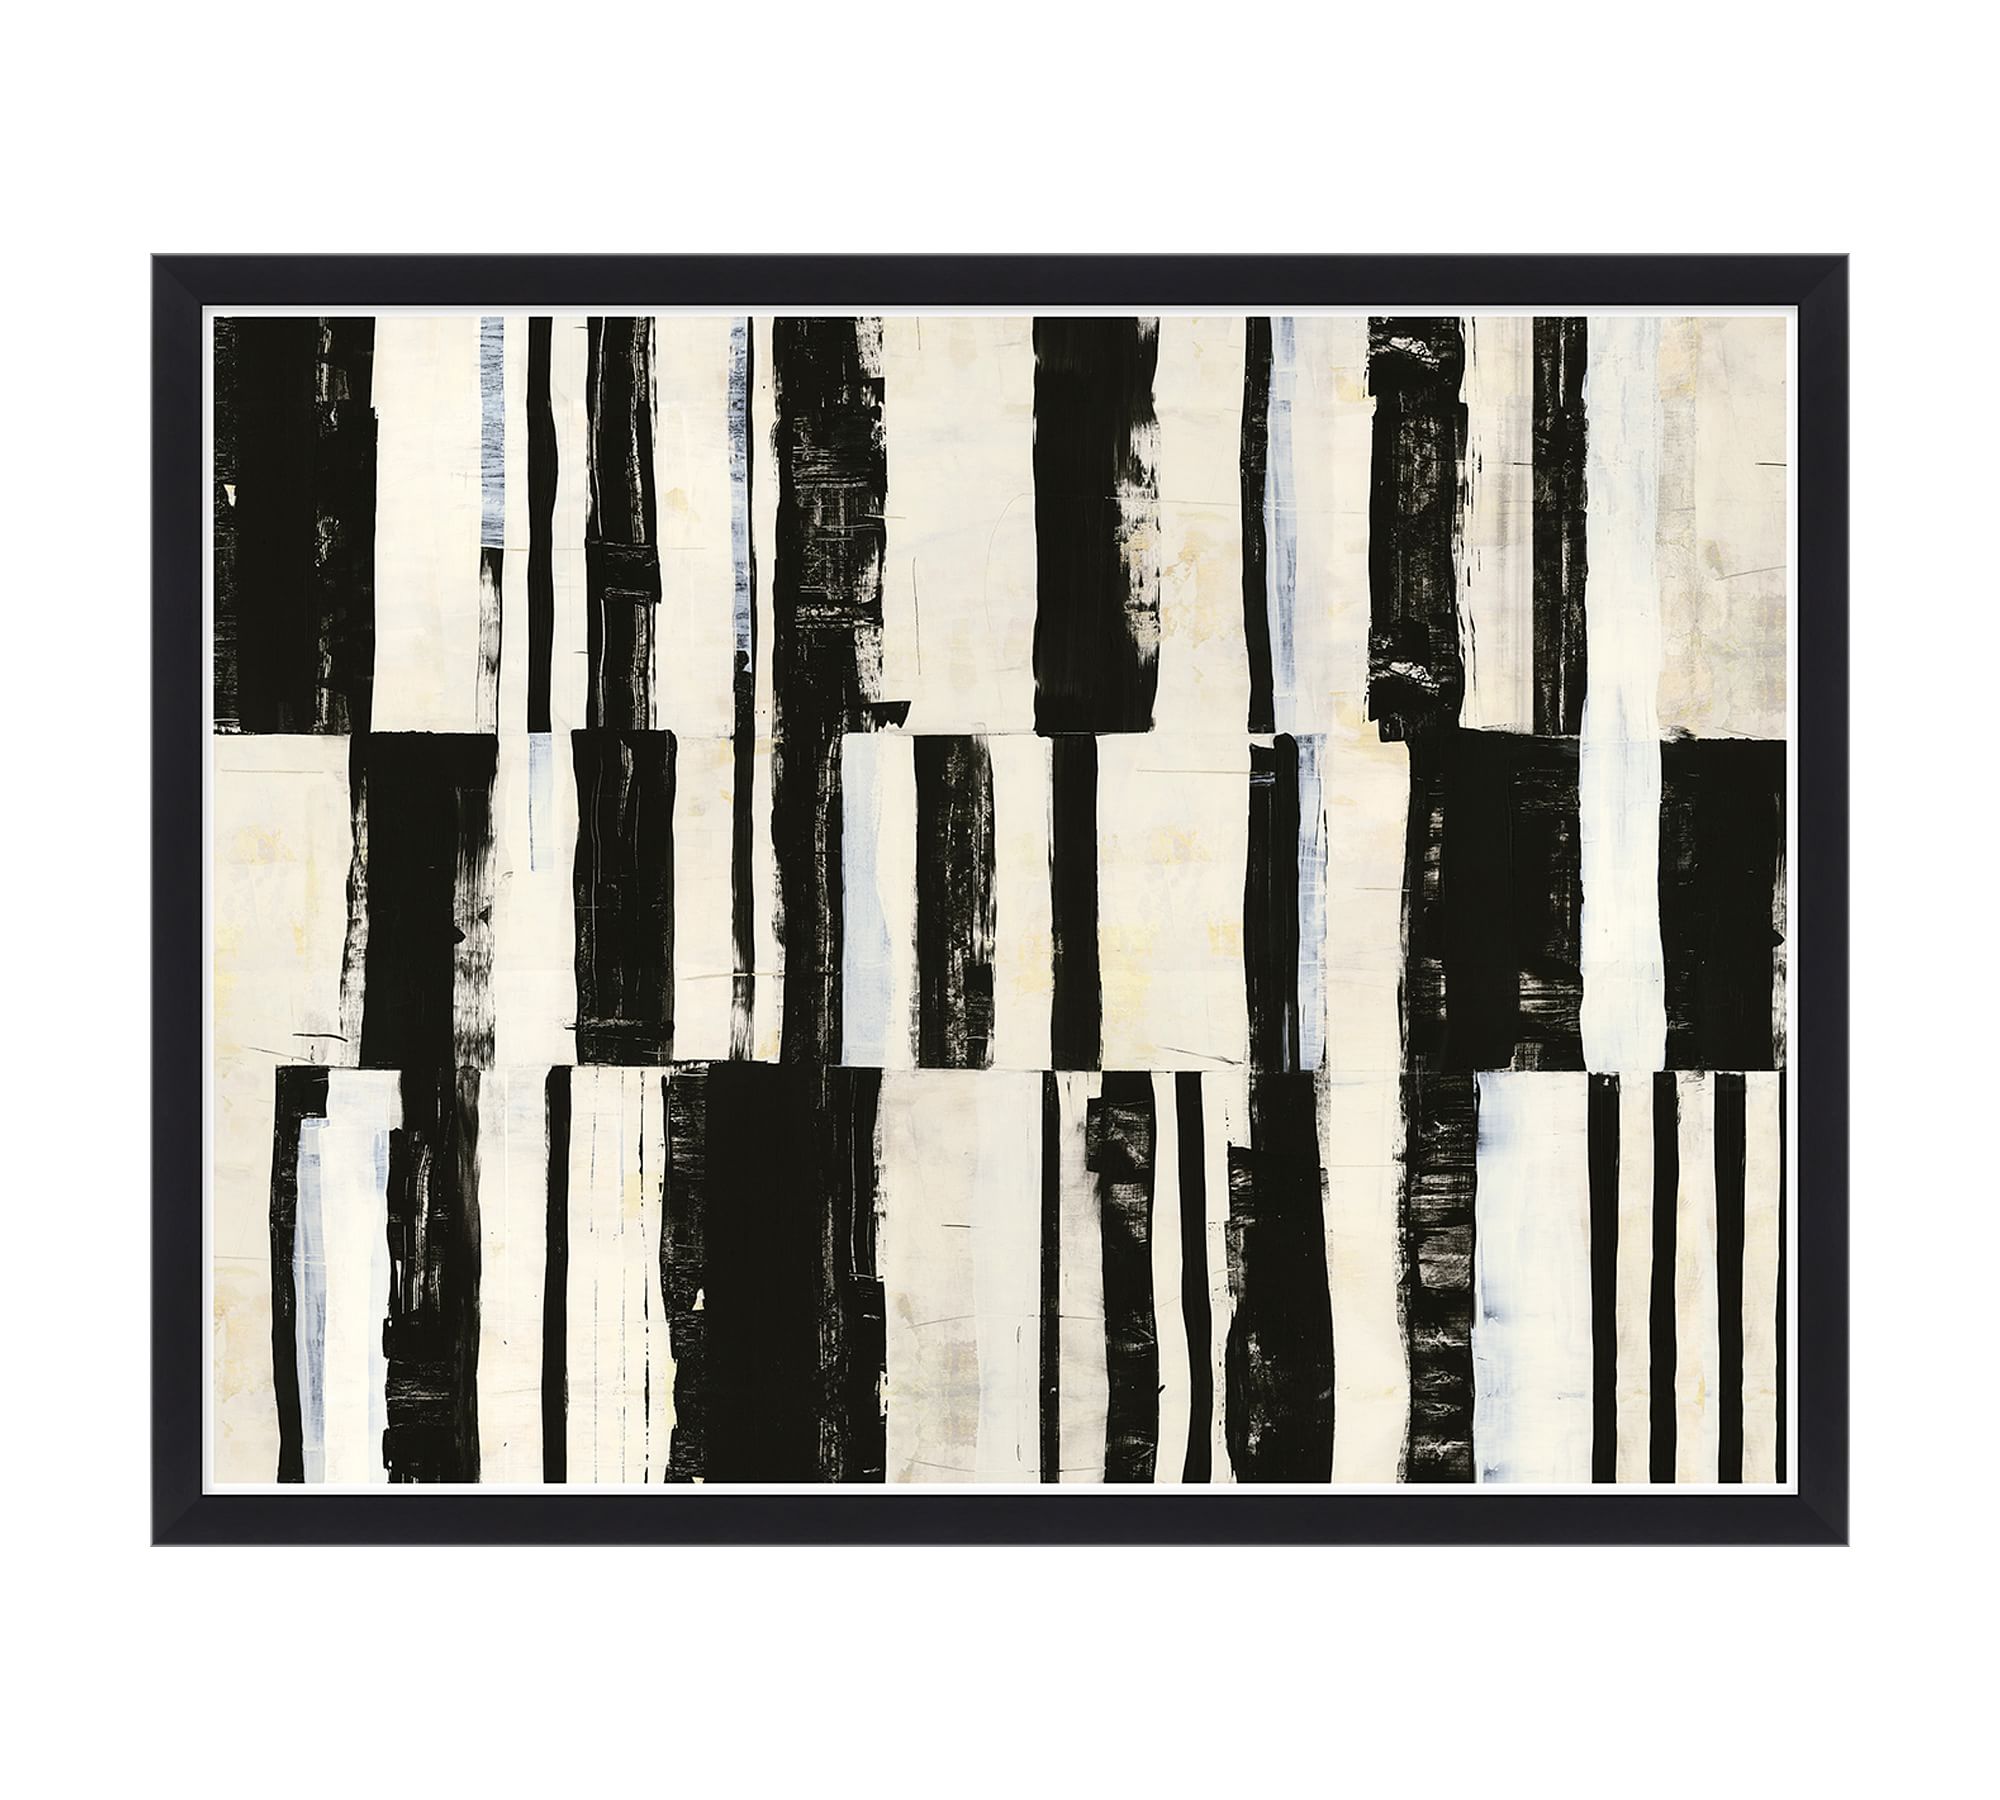 Abstract Penumbra by The Artists Studio